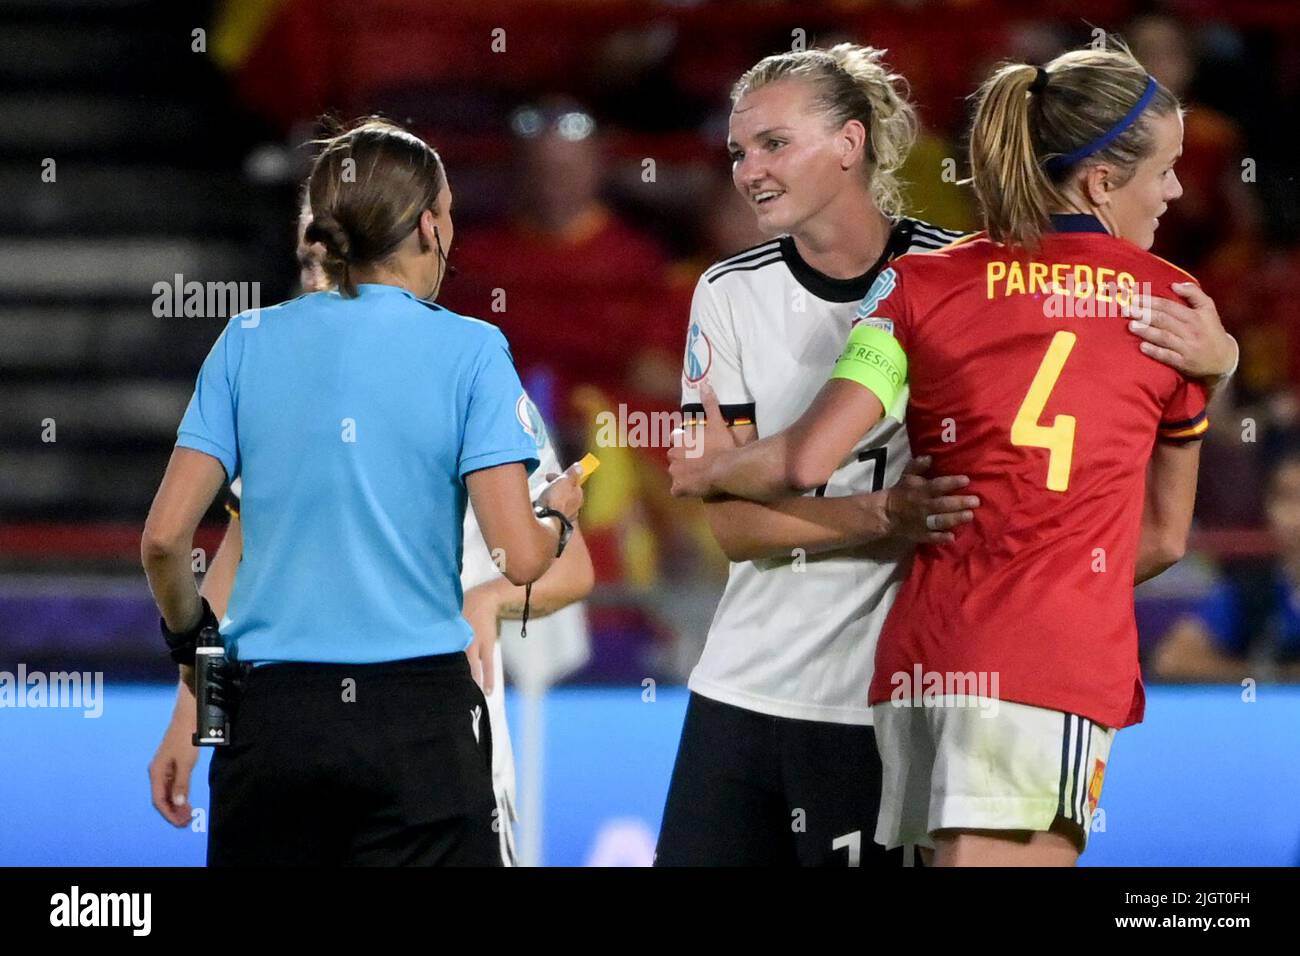 12 July 2022, Great Britain, Brentford/ London: Soccer, Women: European Championship, Germany - Spain, preliminary round, Group B, Matchday 2, Brentford Community Stadium. Germany's Alexandra Popp (M) and Spain's Irene Paredes embrace in front of referee Stephanie Frappart. Photo: Sebastian Christoph Gollnow/dpa Stock Photo